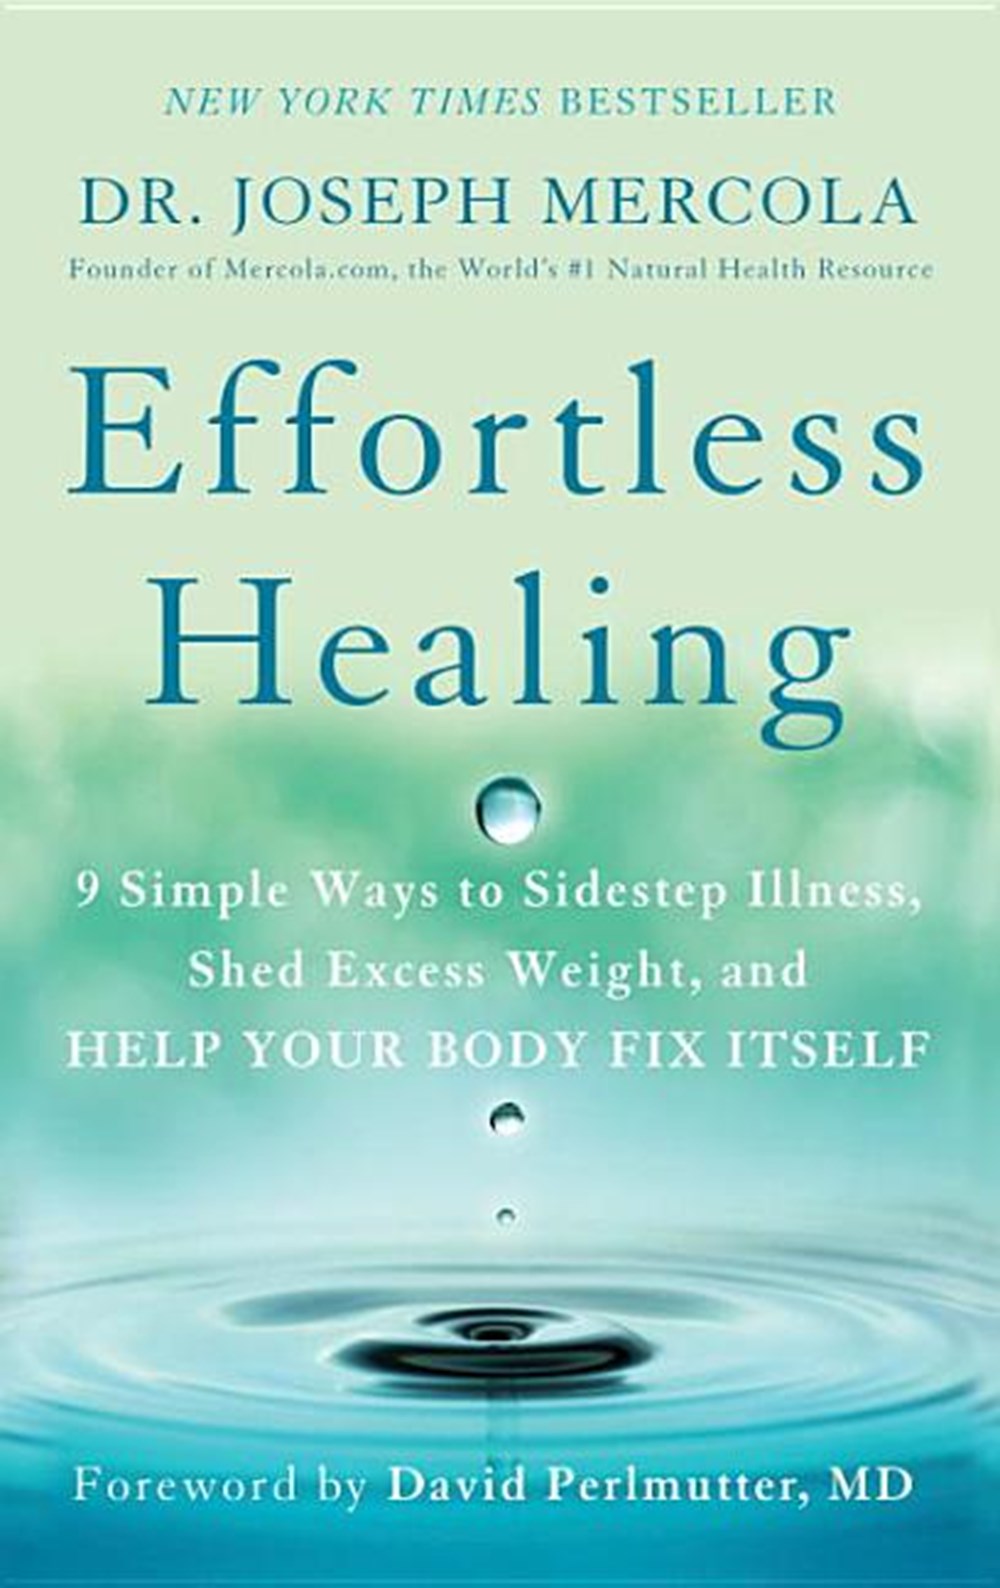 Effortless Healing: 9 Simple Ways to Sidestep Illness, Shed Excess Weight, and Help Your Body Fix It